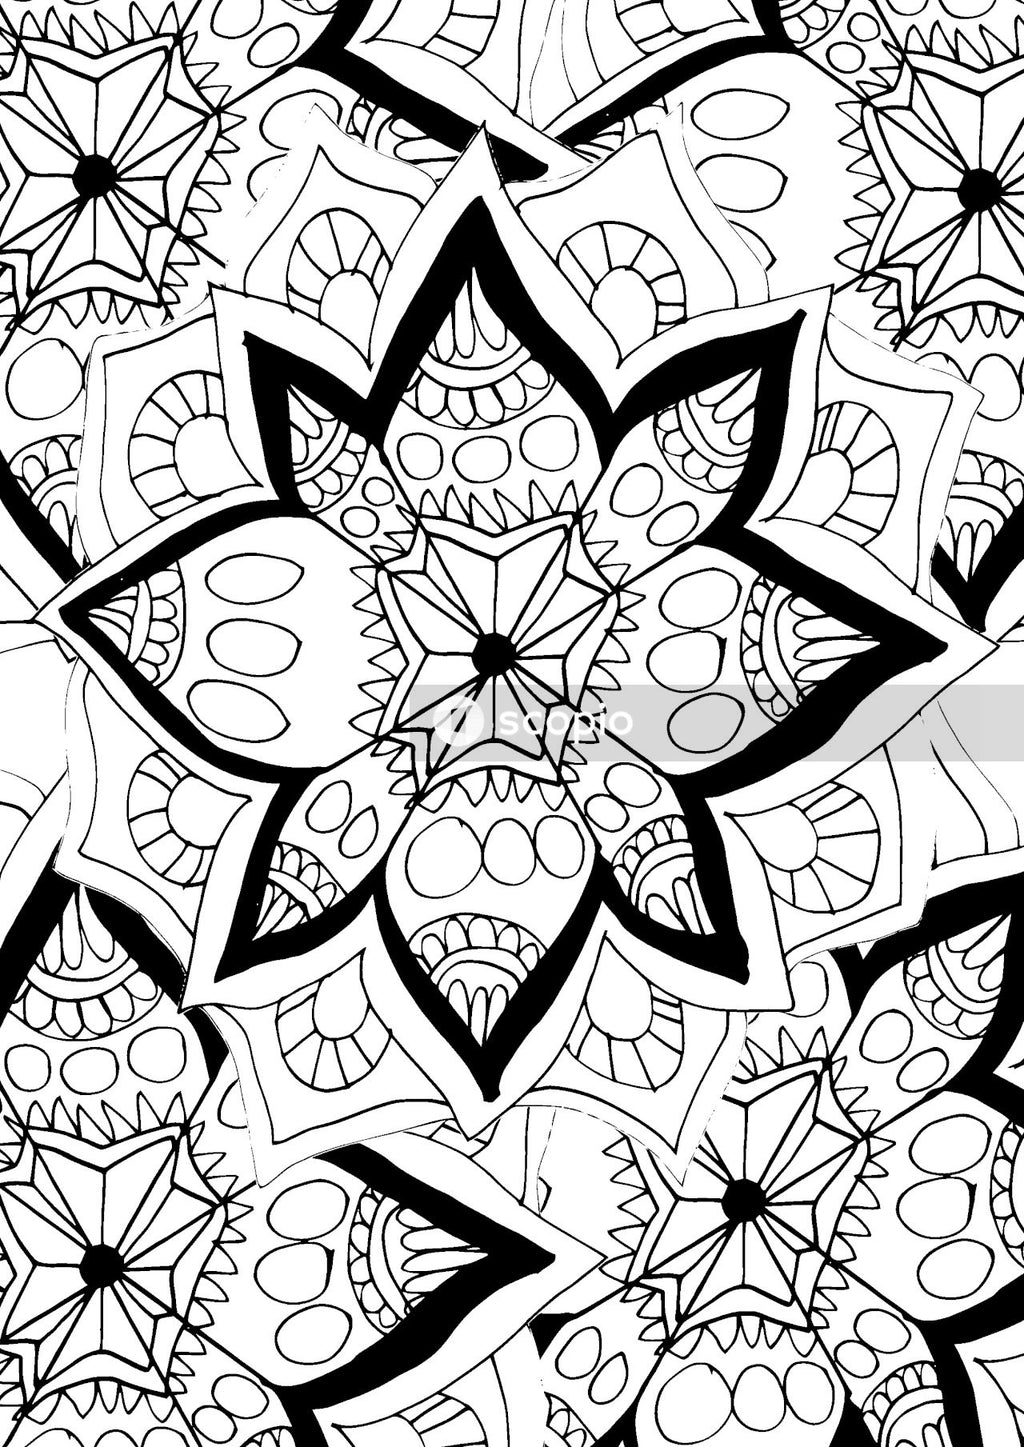 Black and white floral textile